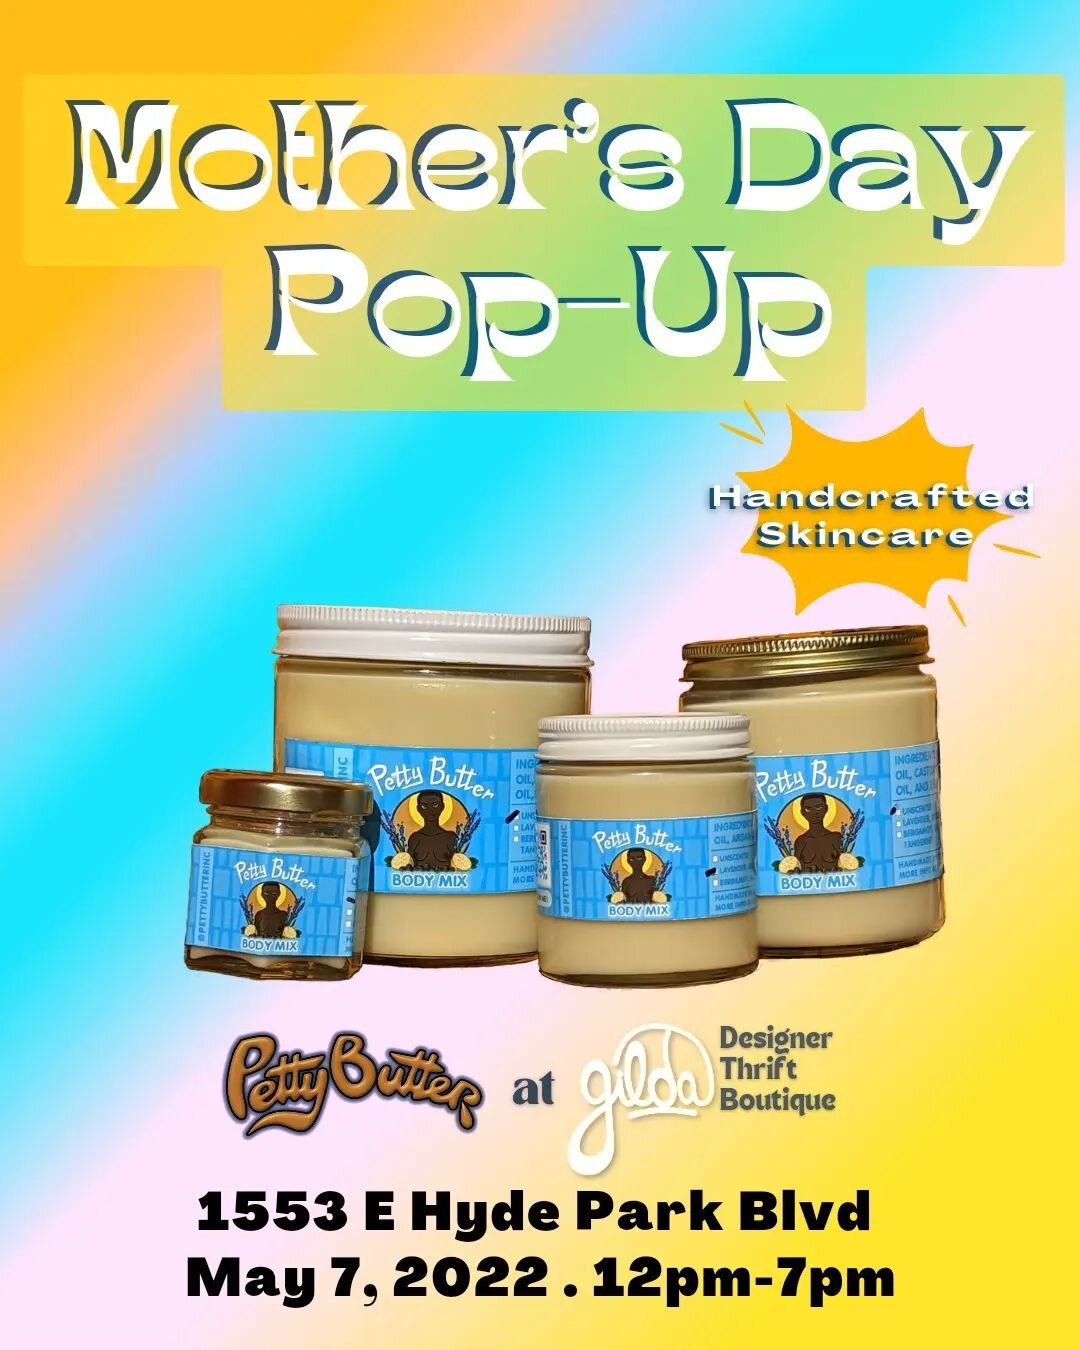 This Mother's Day, elevate her style and self-care routine at the Petty Butter Pop-Up at GILDA Designer Thrift Boutique

Petty Butter stimulates daily moments of moisturization and self-connection.

GILDA's hosts a unique curation of high-end vintage